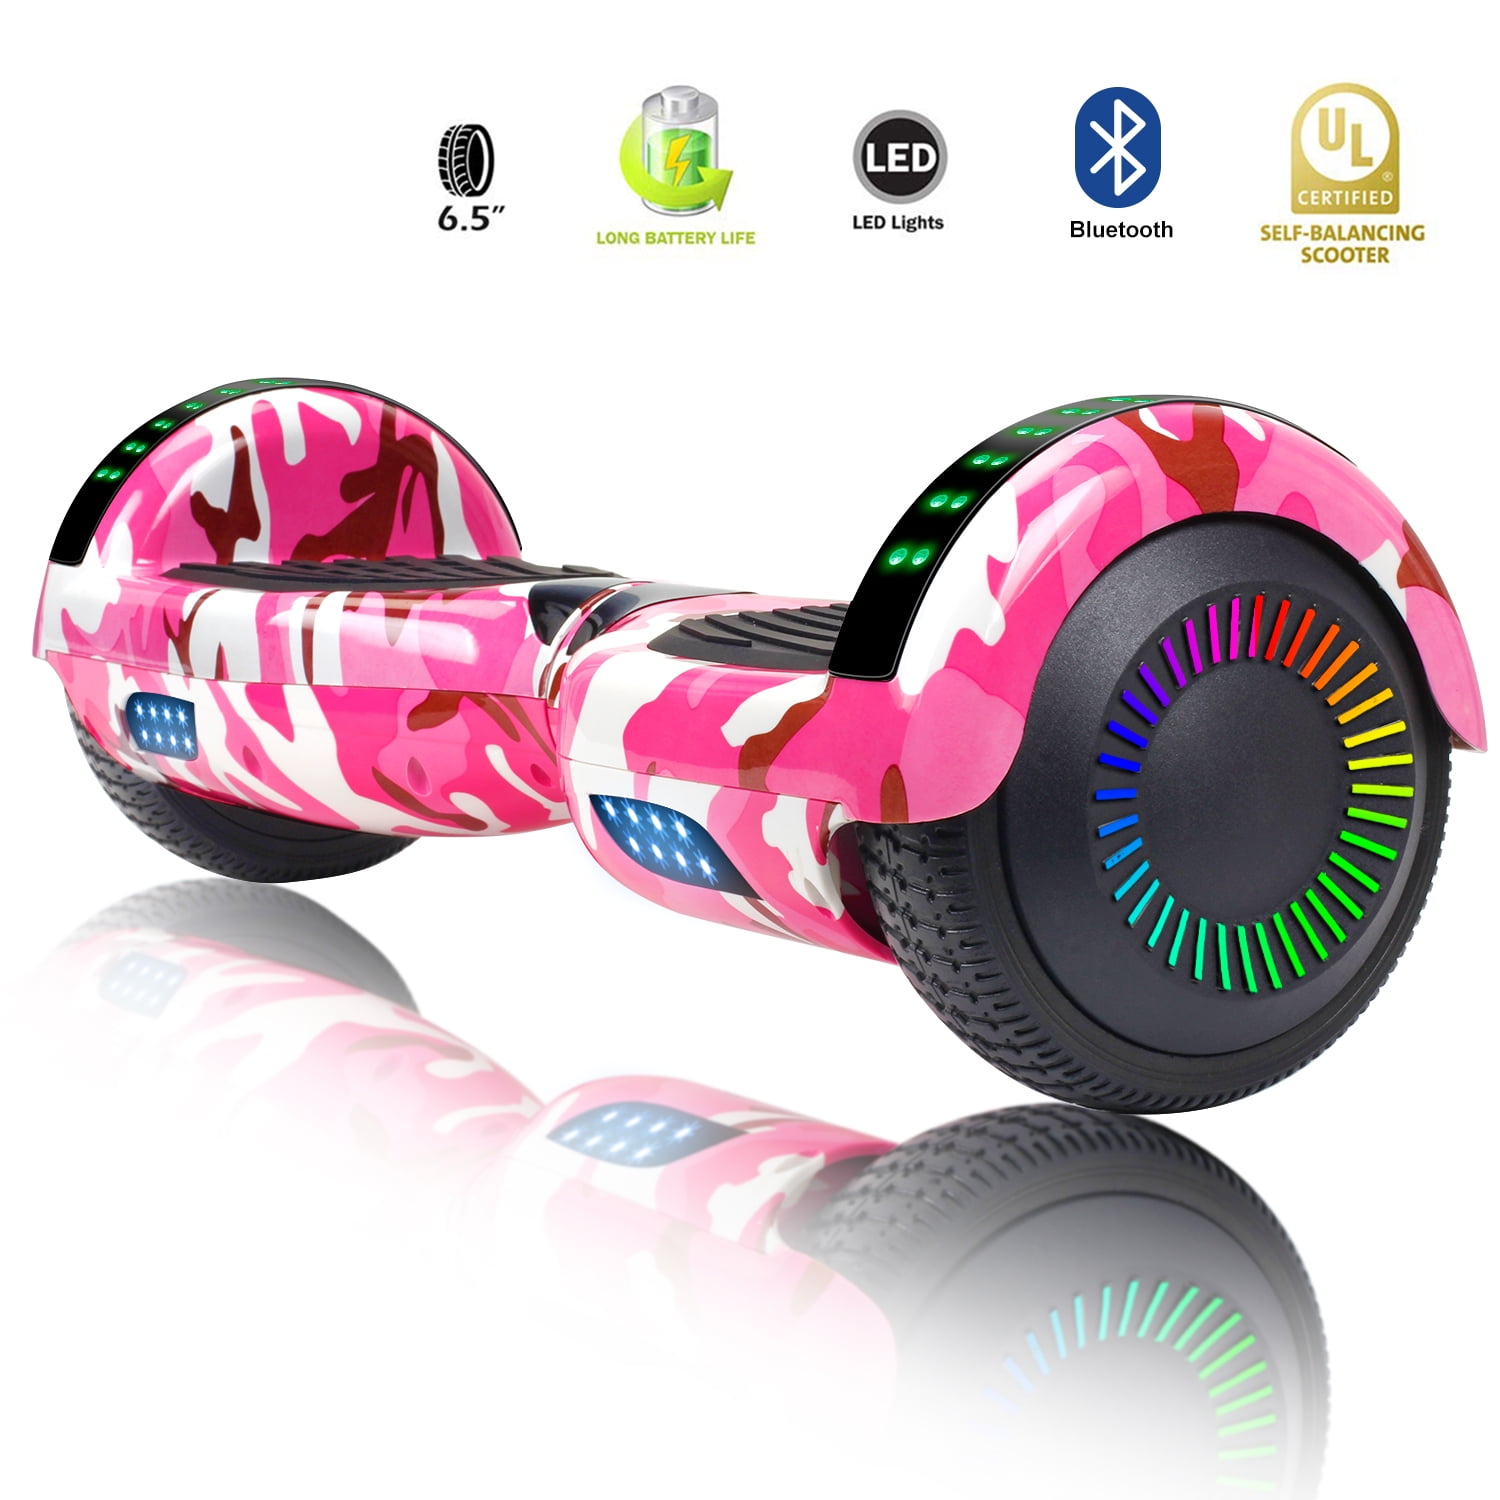 6.5" LED Bluetooth Hoverboard Electric Self Balancing Scooter no Bag Pink 